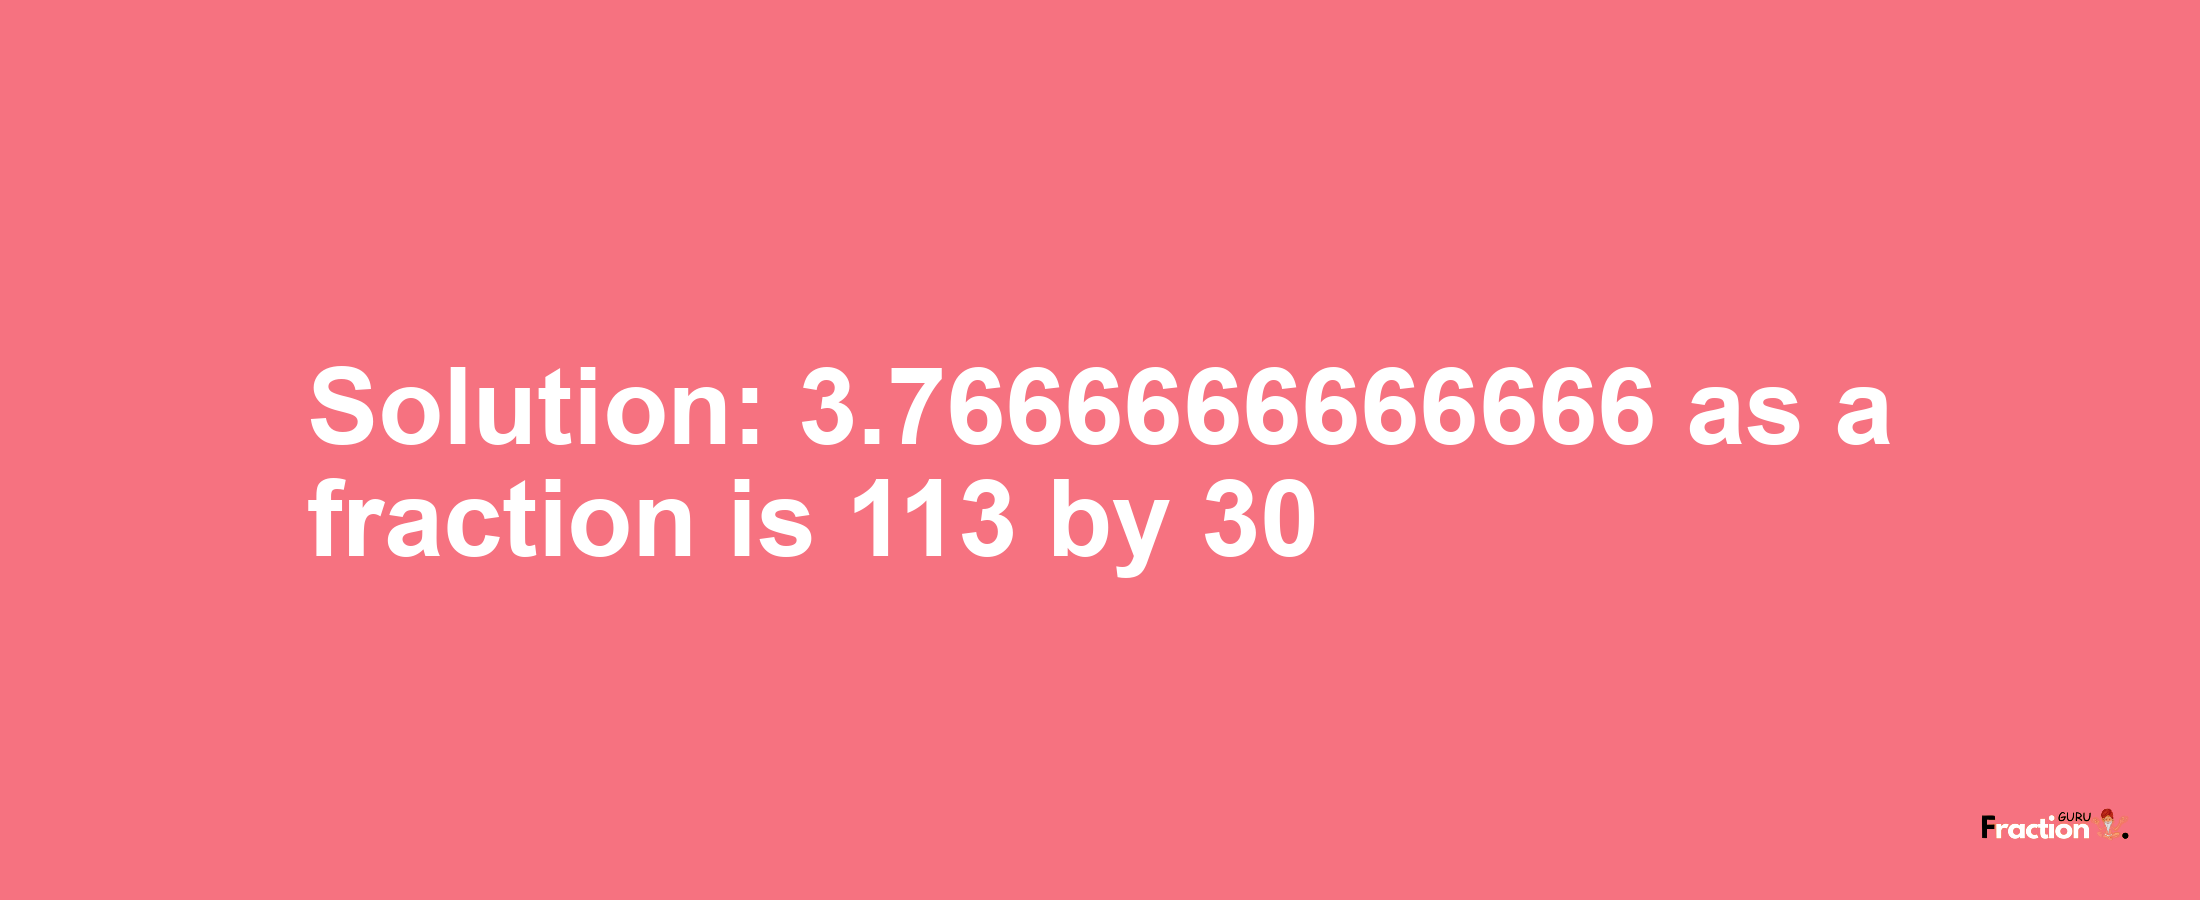 Solution:3.7666666666666 as a fraction is 113/30